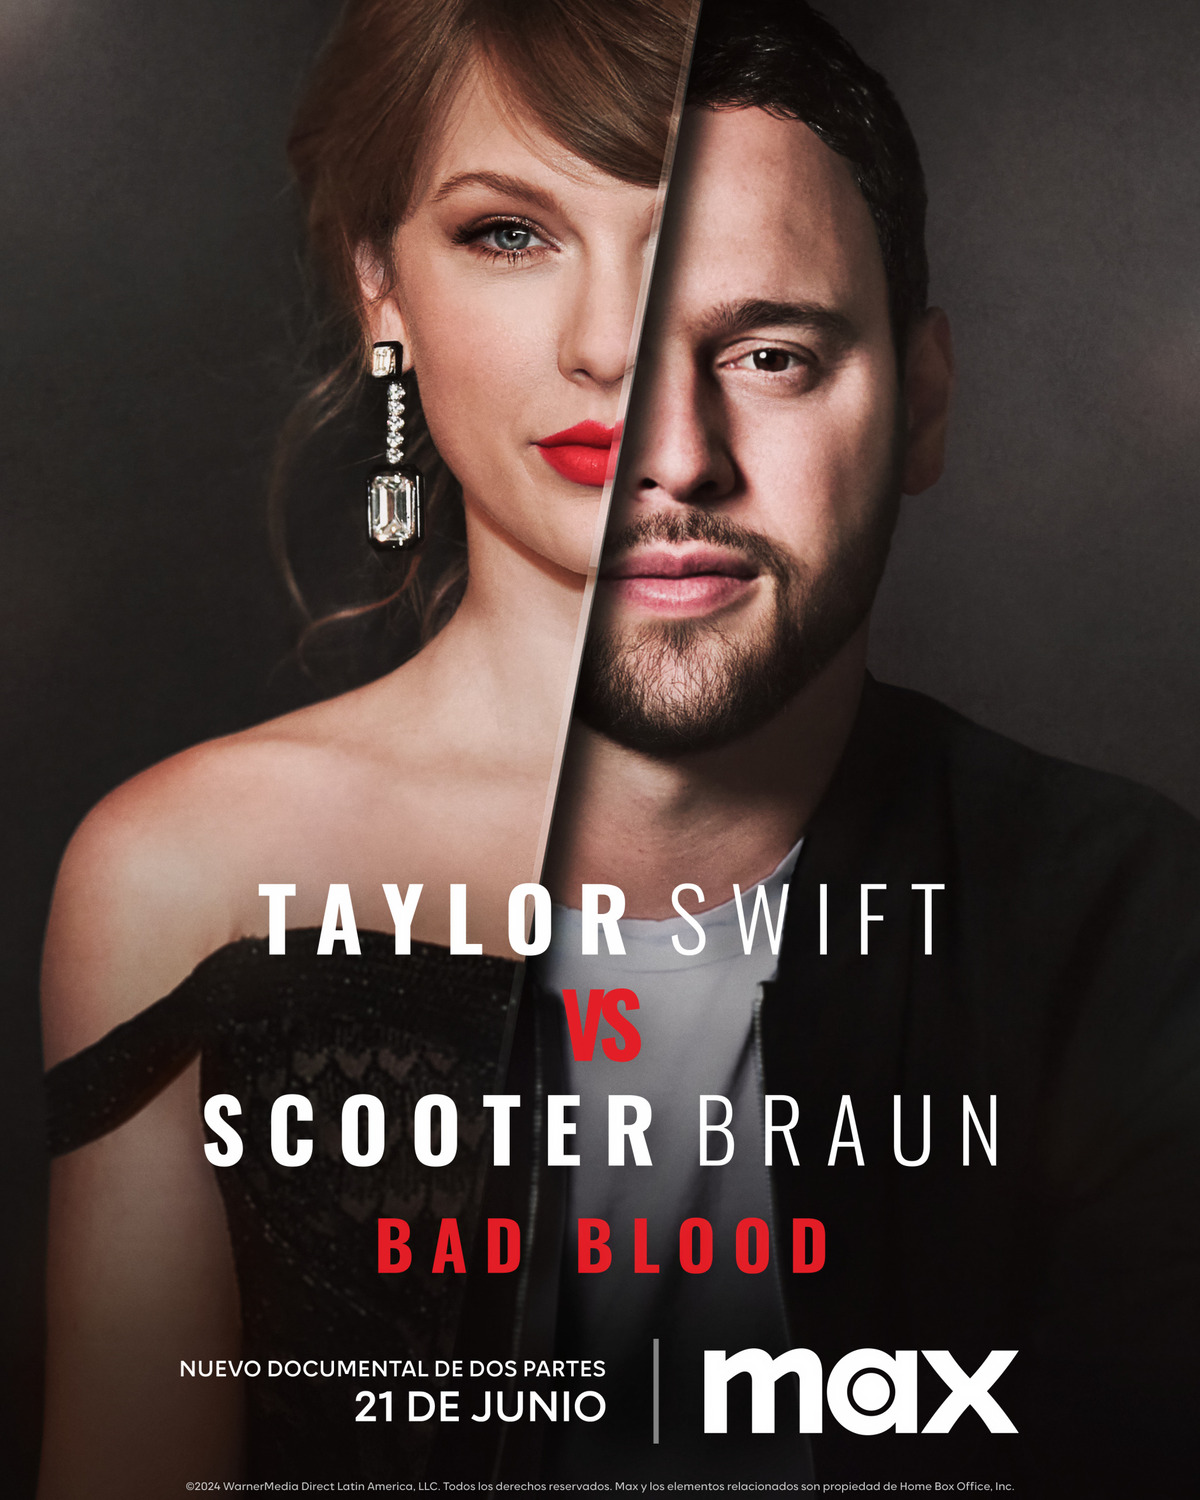 Extra Large TV Poster Image for Taylor Swift vs. Scooter Braun 